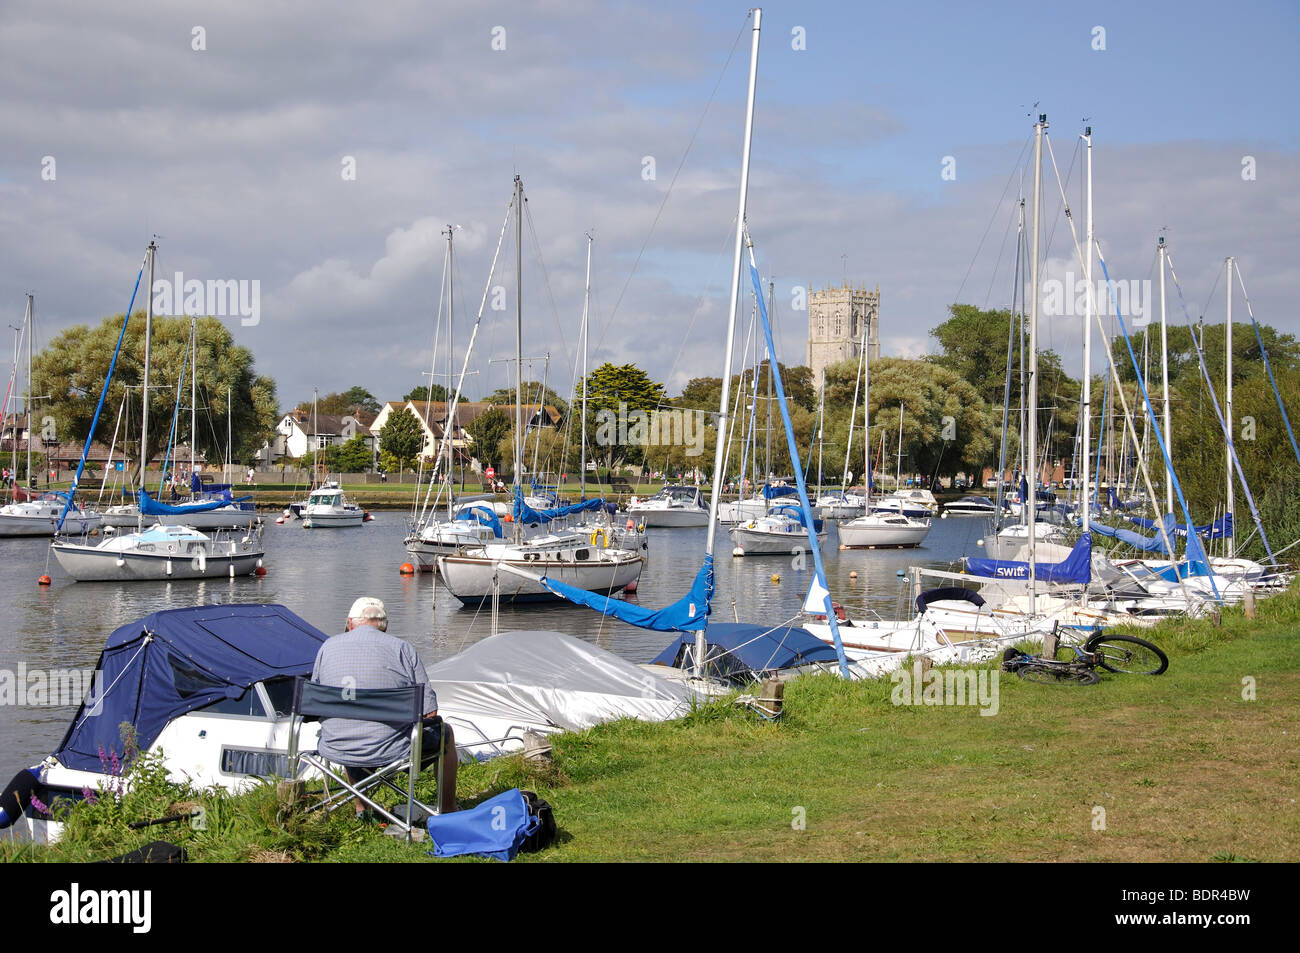 Town view from Wick Marsh across River Stour, Christchurch, Dorset, England, United Kingdom Stock Photo